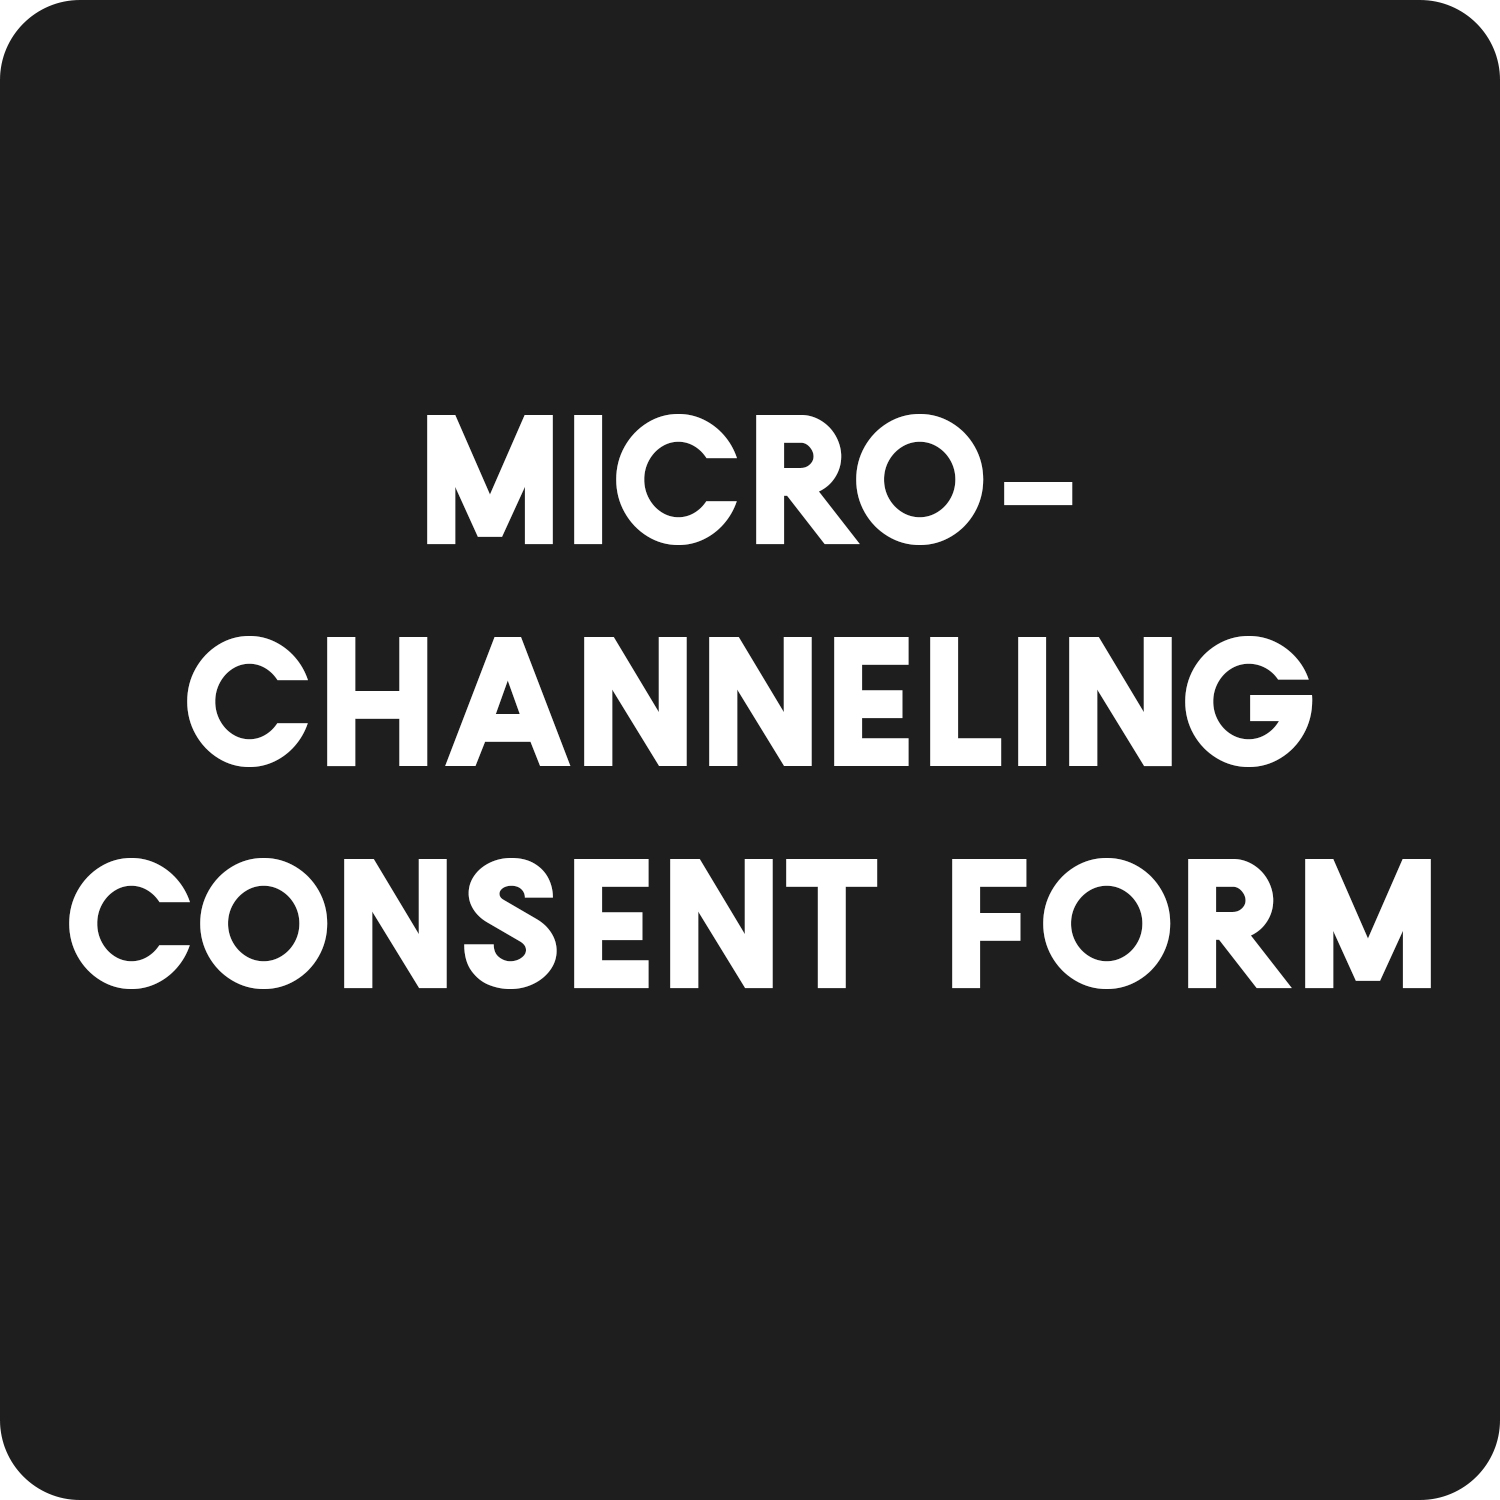 Micro-channeling Consent Form